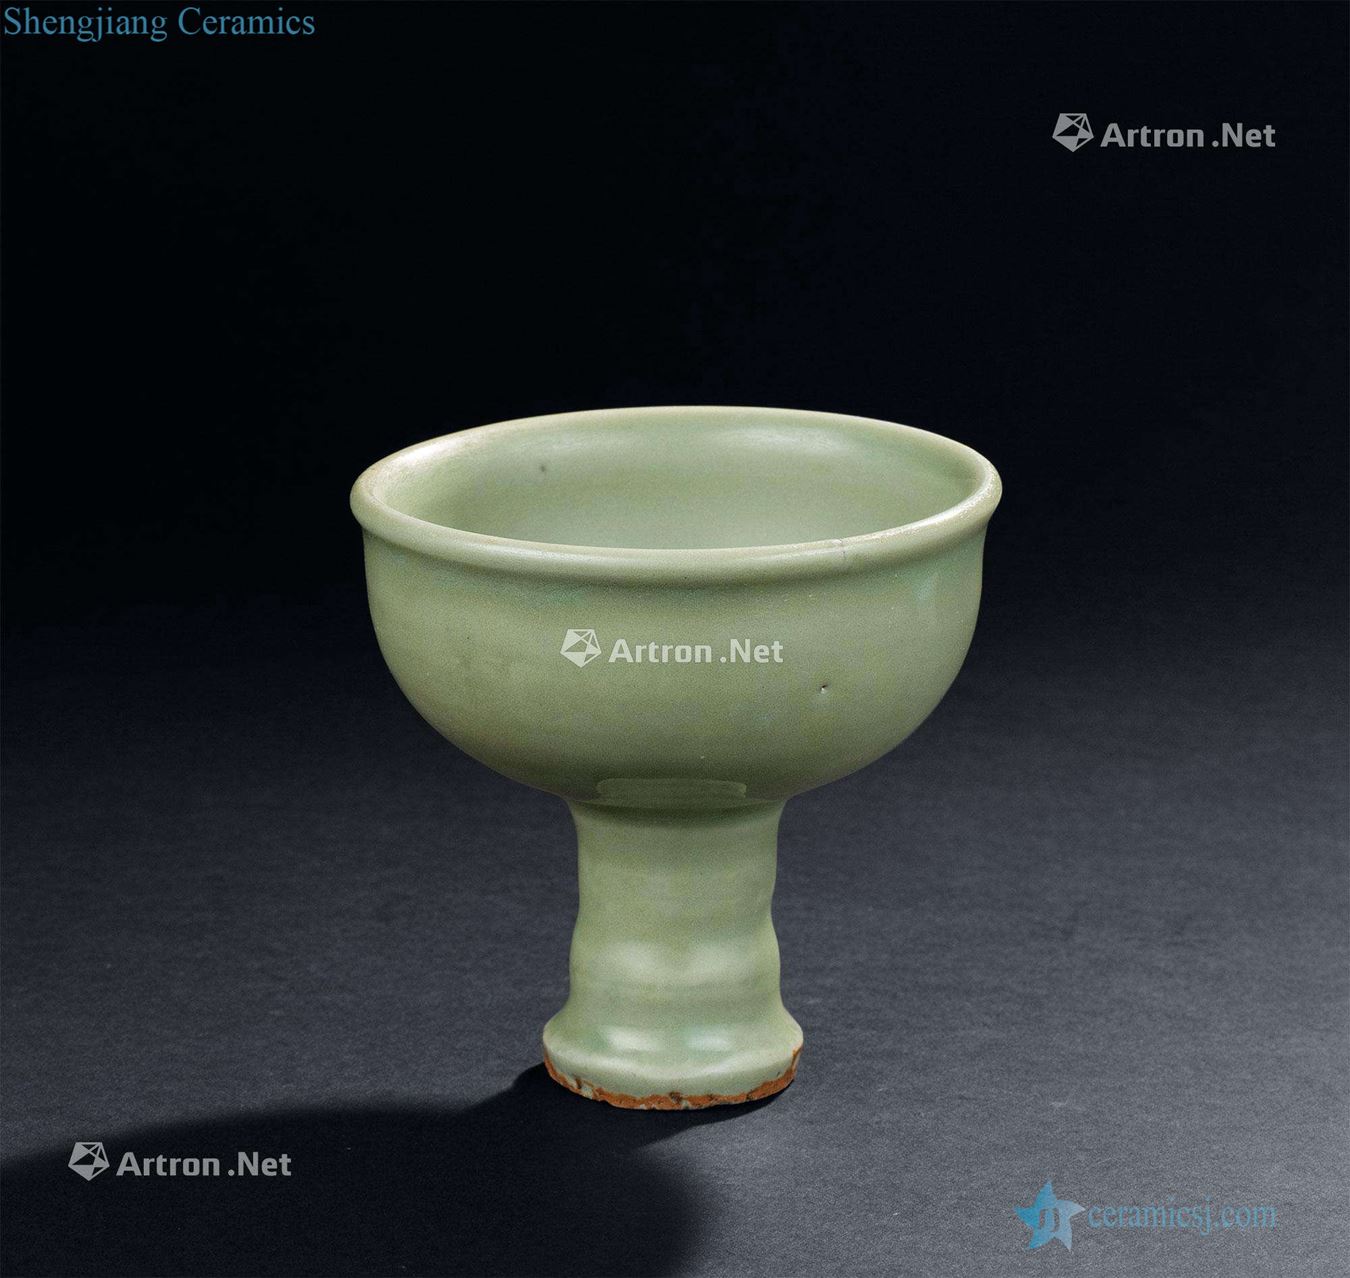 The yuan dynasty (1279-1368), longquan celadon plum green carved flower grain footed cup